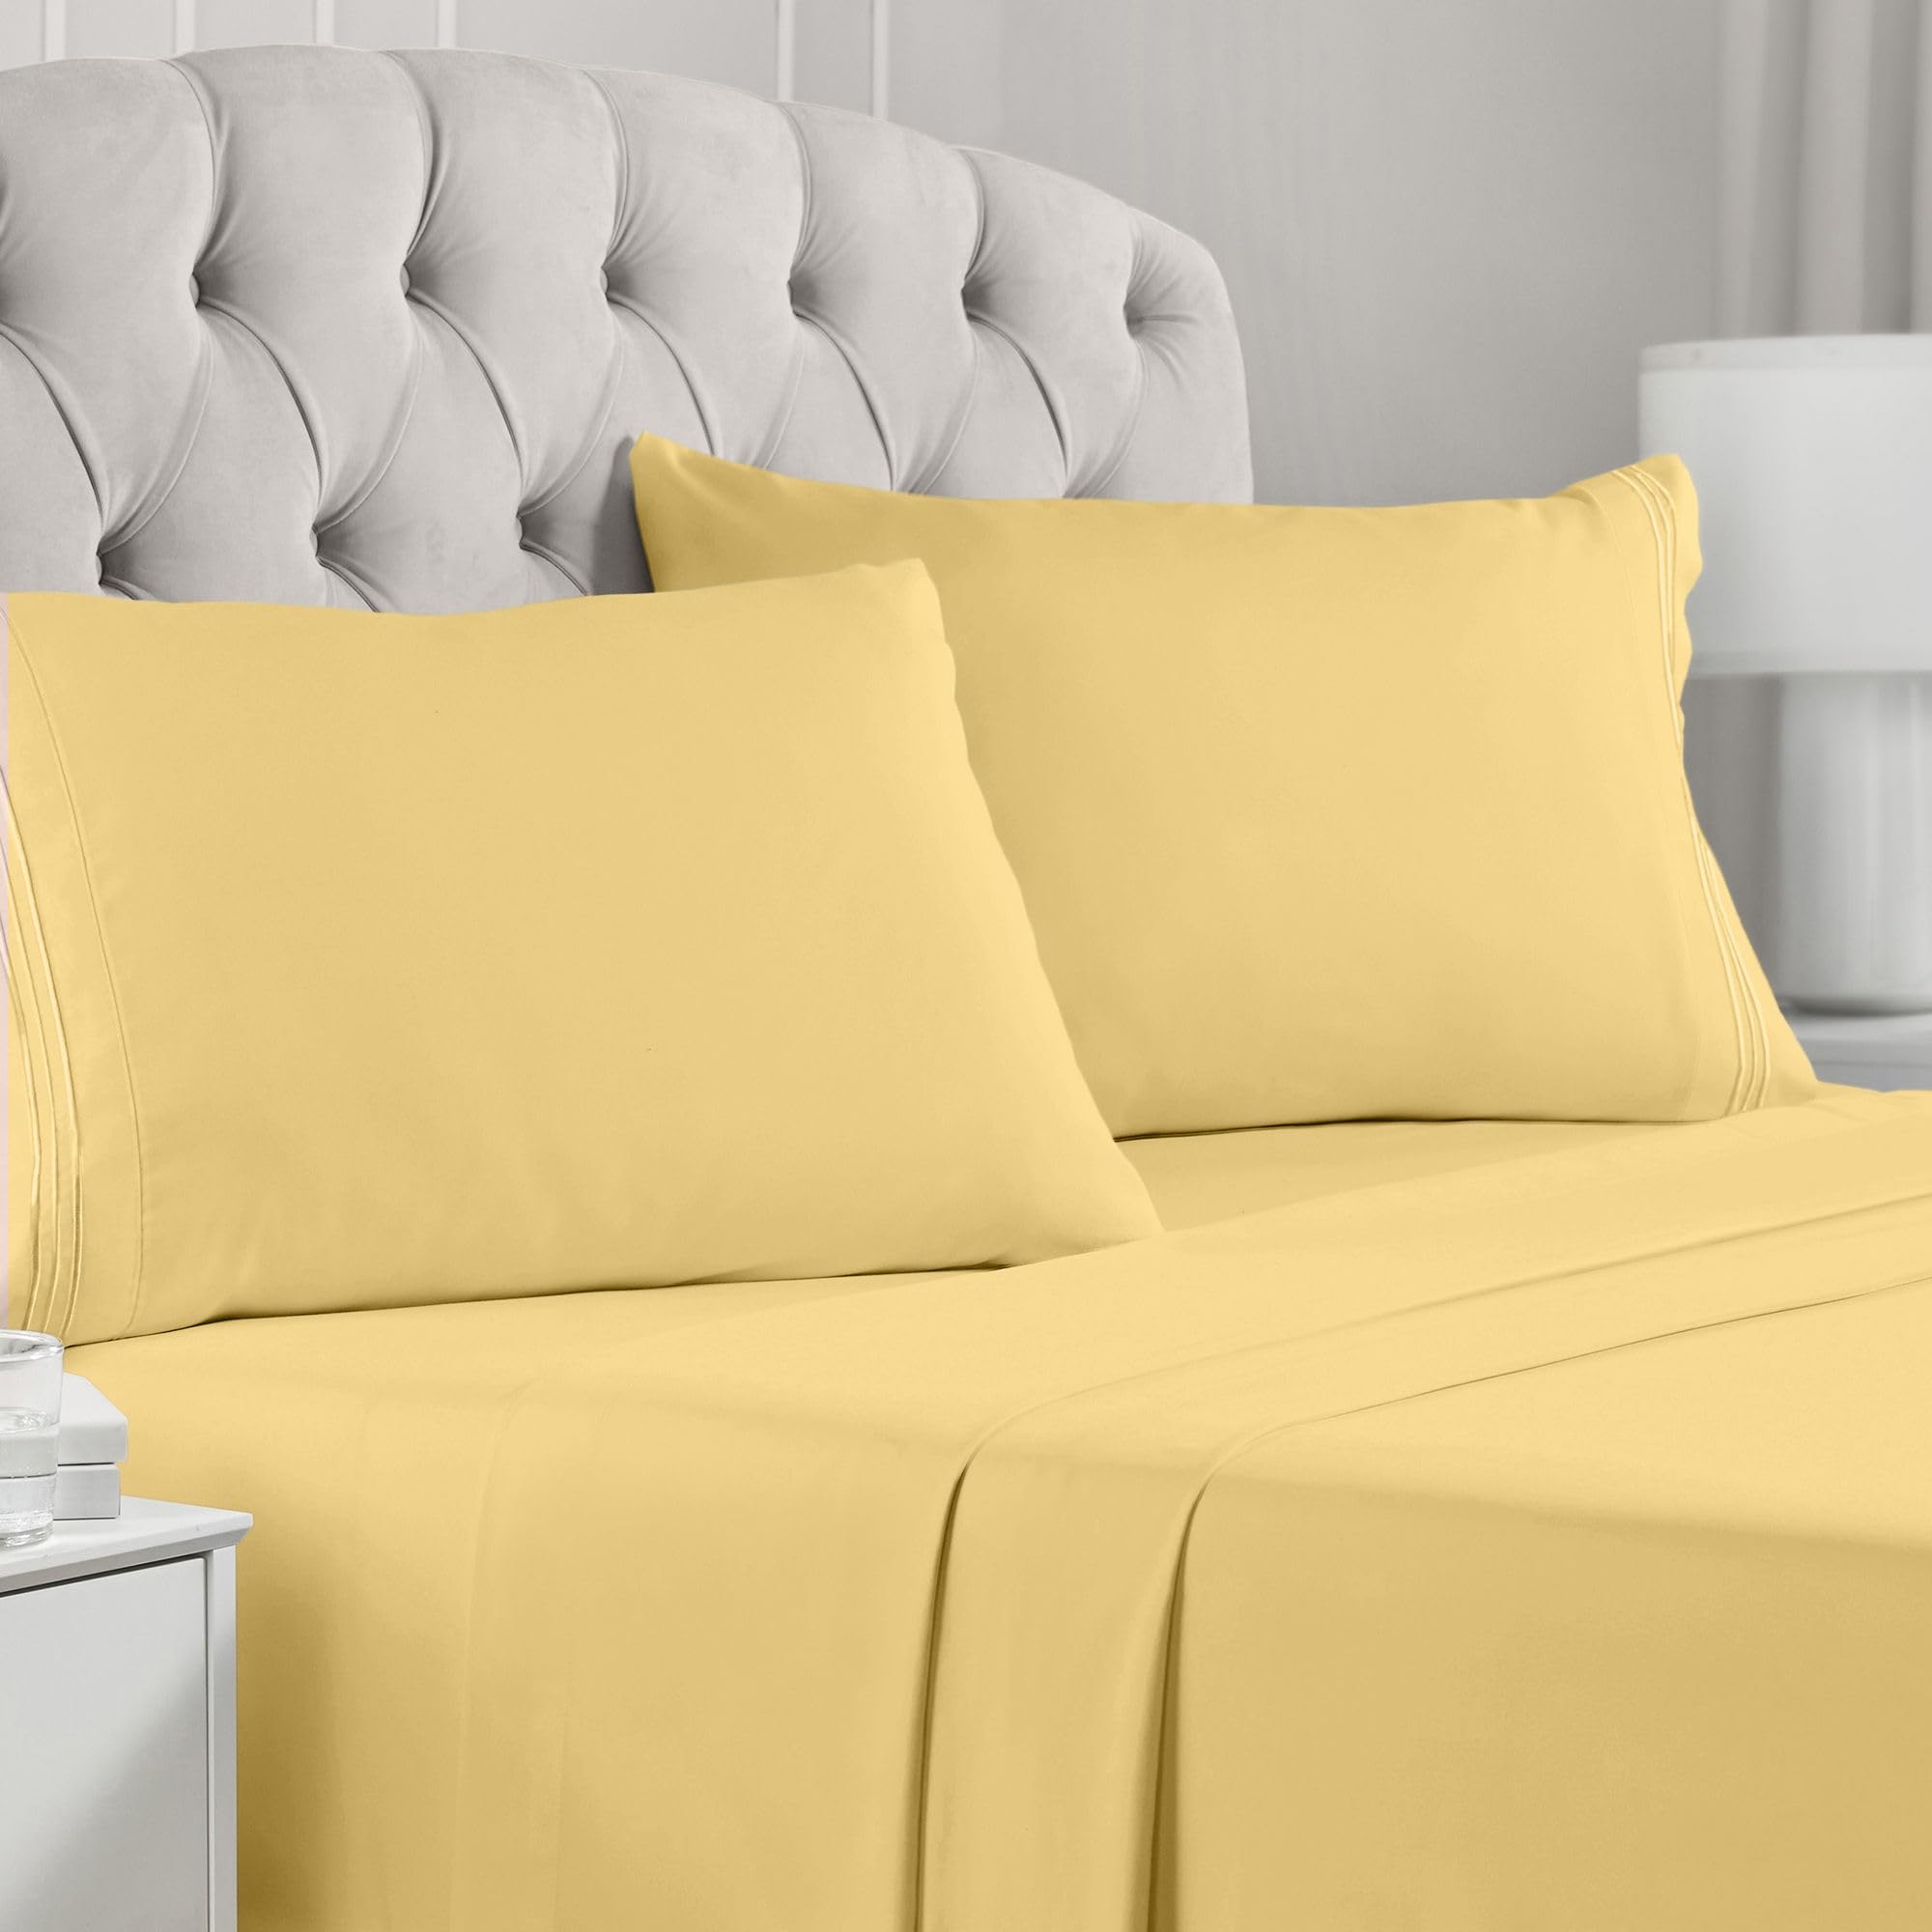 Book Cover Mellanni California King Sheet Set - 4 Piece Iconic Collection Bedding Sheets & Pillowcases - Extra Soft, Cooling Bed Sheets - Deep Pocket up to 16